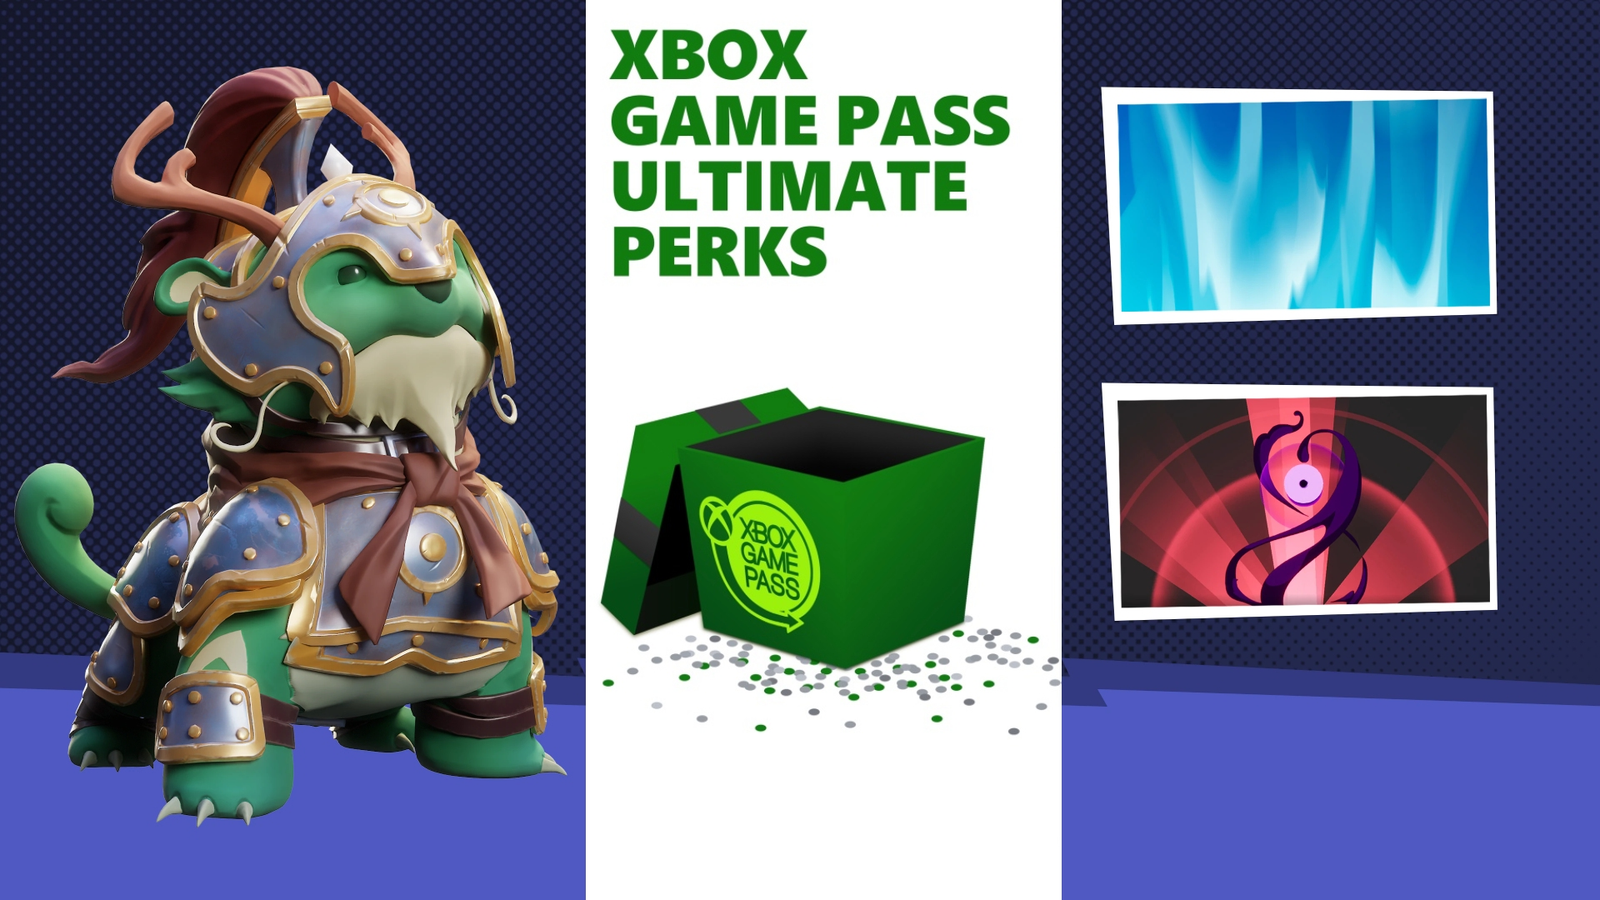 Xbox Game Pass Perks and How to Redeem Perks via Xbox Game Pass